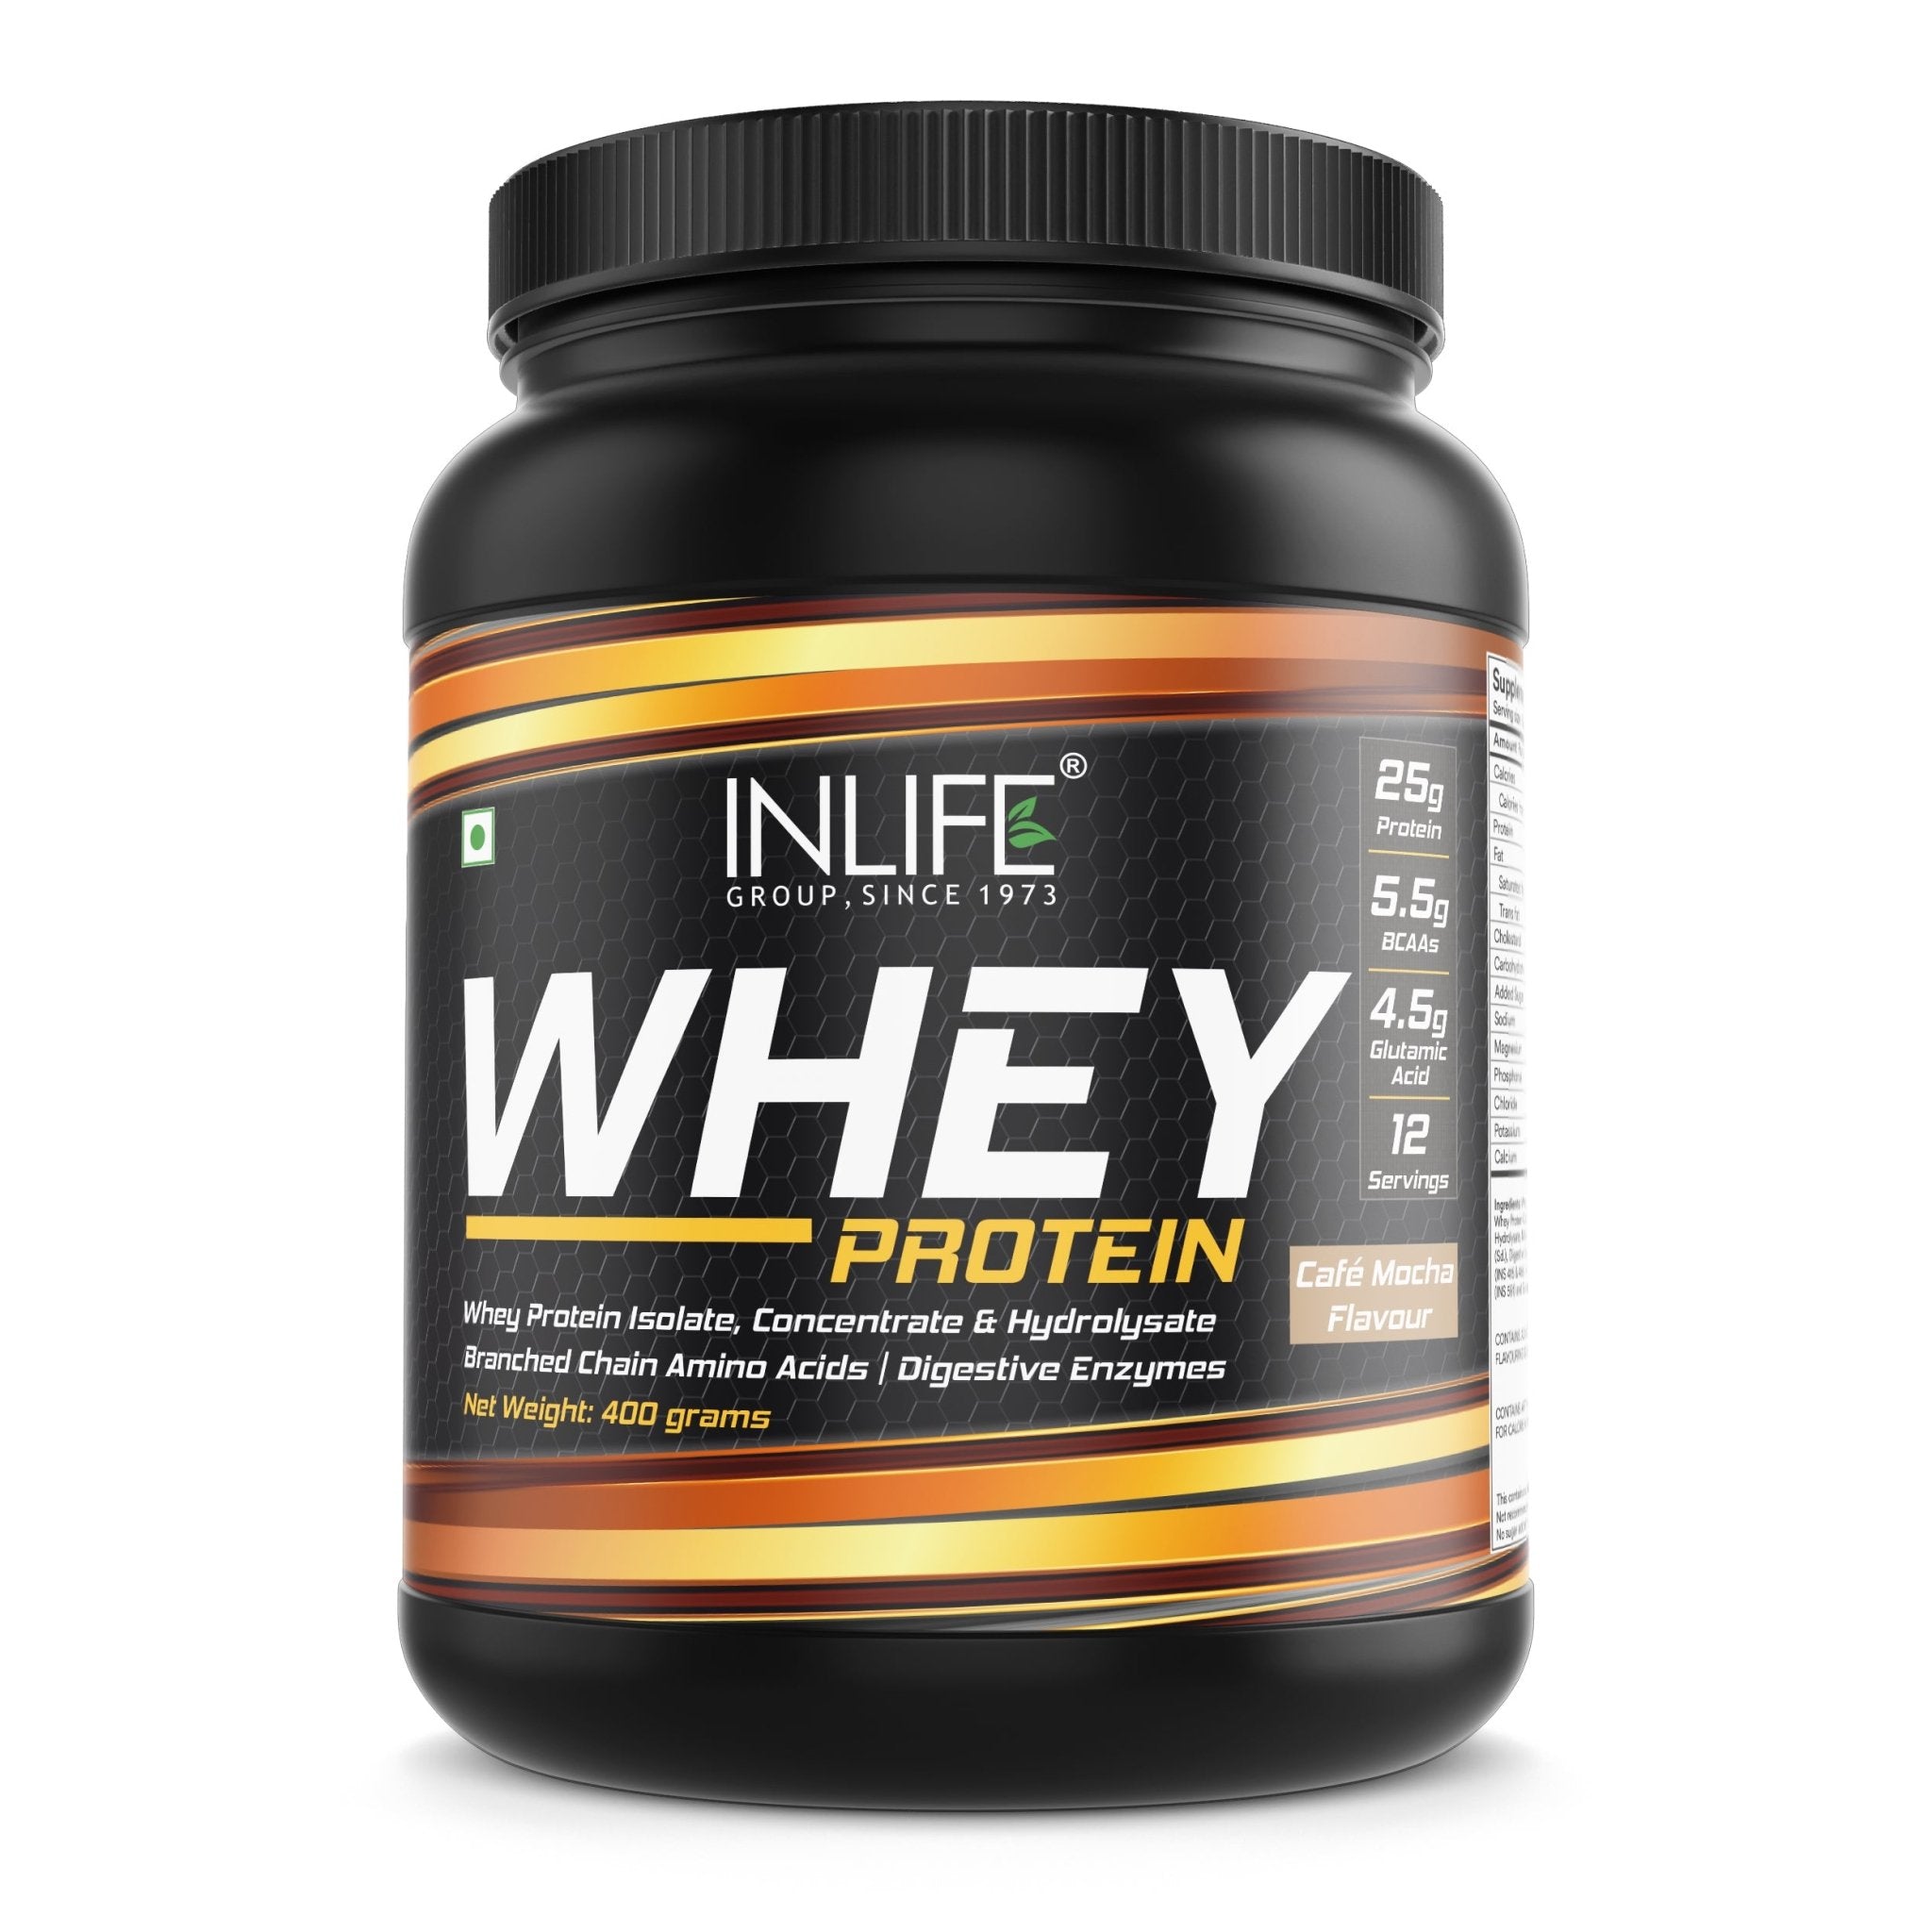 INLIFE Whey Protein Powder, Bodybuilding Supplement - Inlife Pharma Private Limited